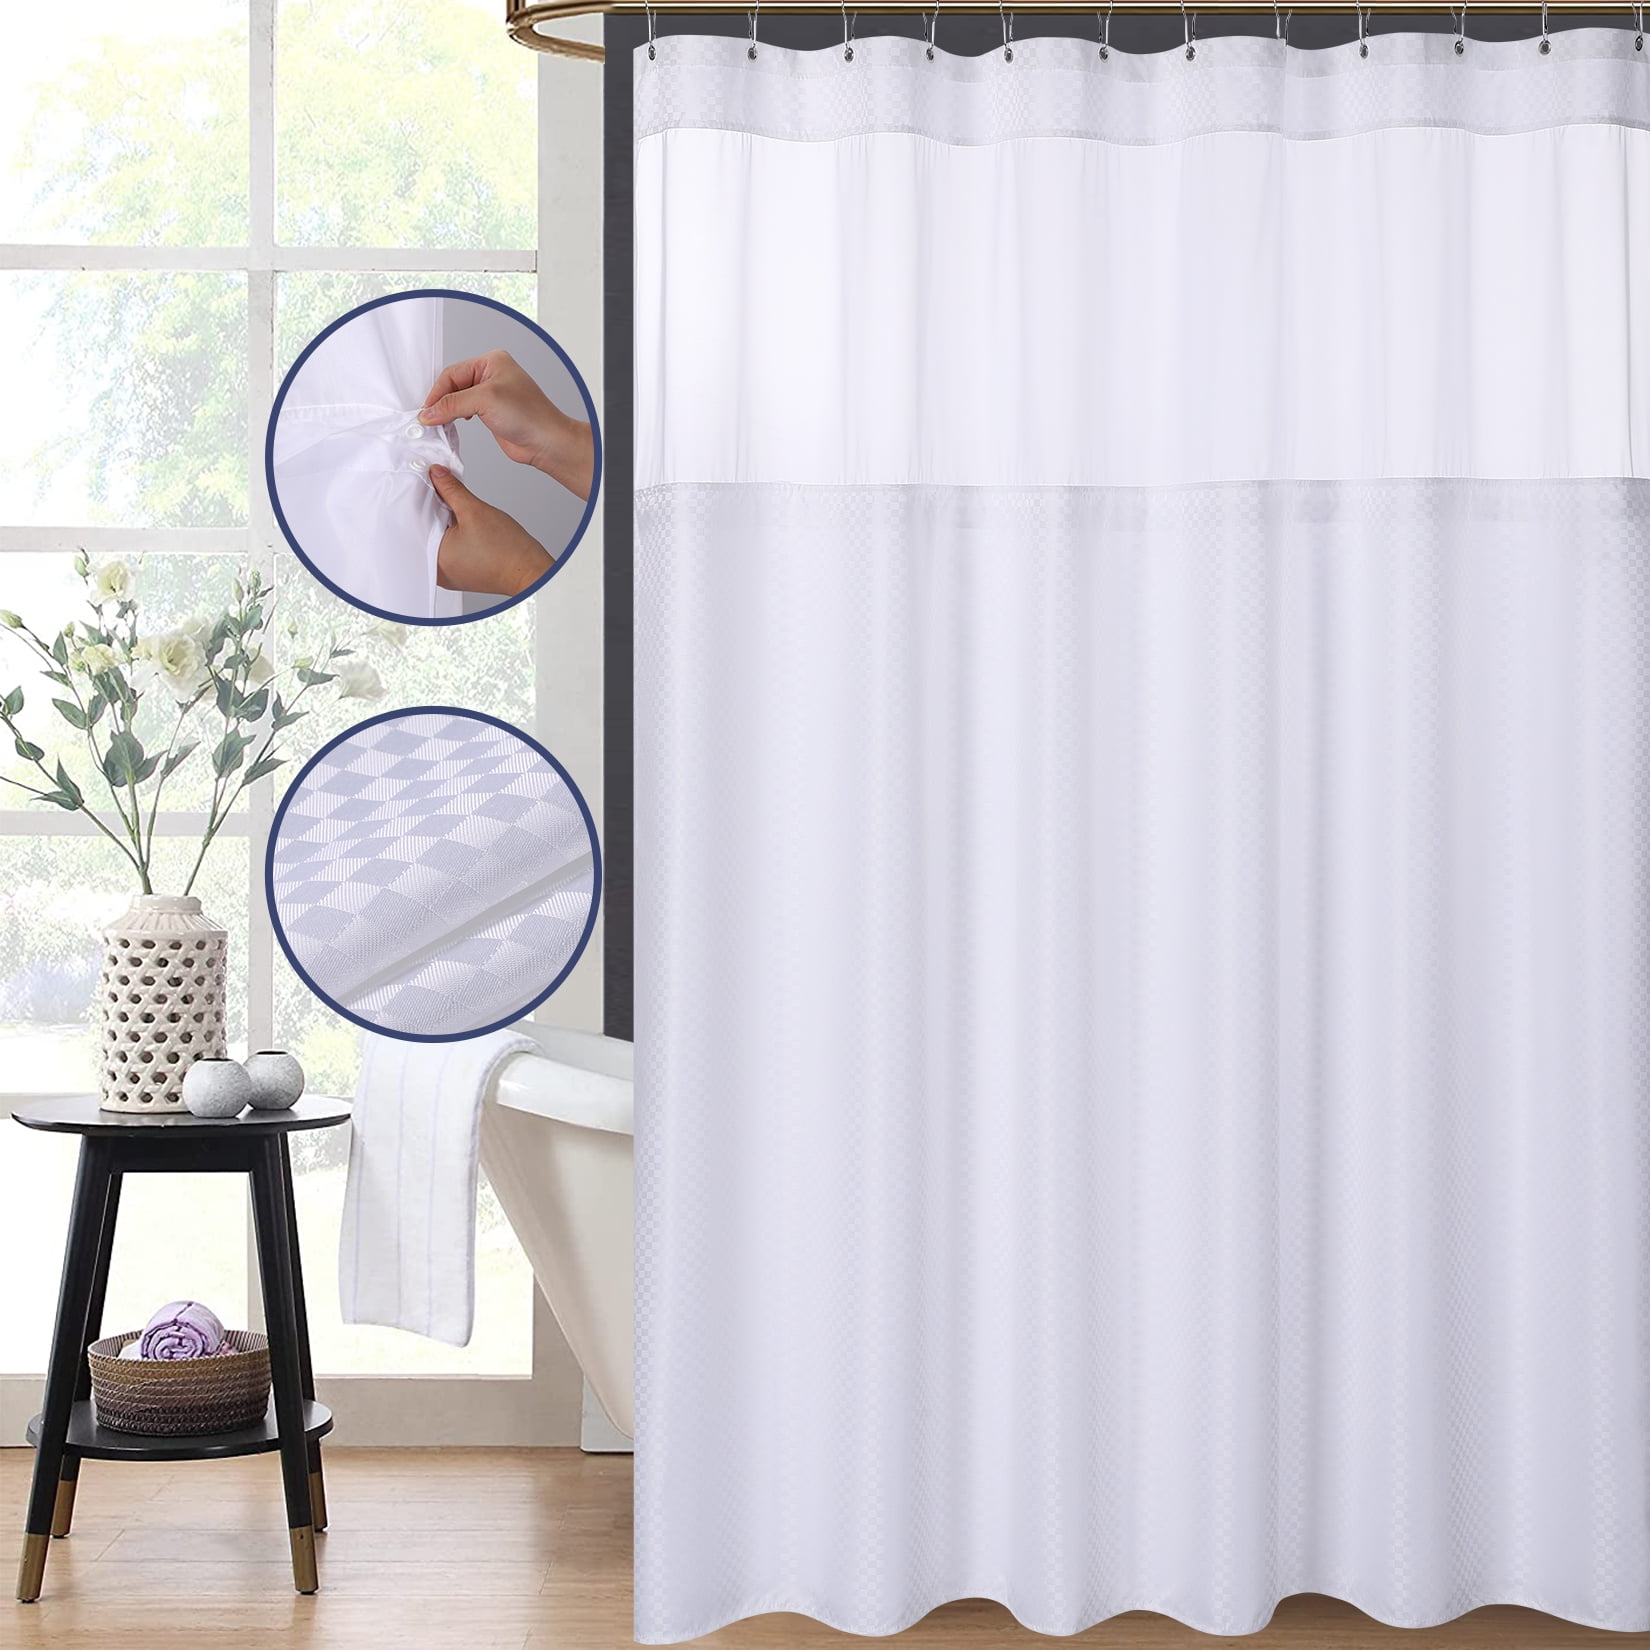 Lagute SnapHook Hook Free Shower Curtain with Snap-in Liner & See Through  Top Window | Hotel Grade, Machine Washable & Water Repellent | 71Wx74L -  Walmart.com